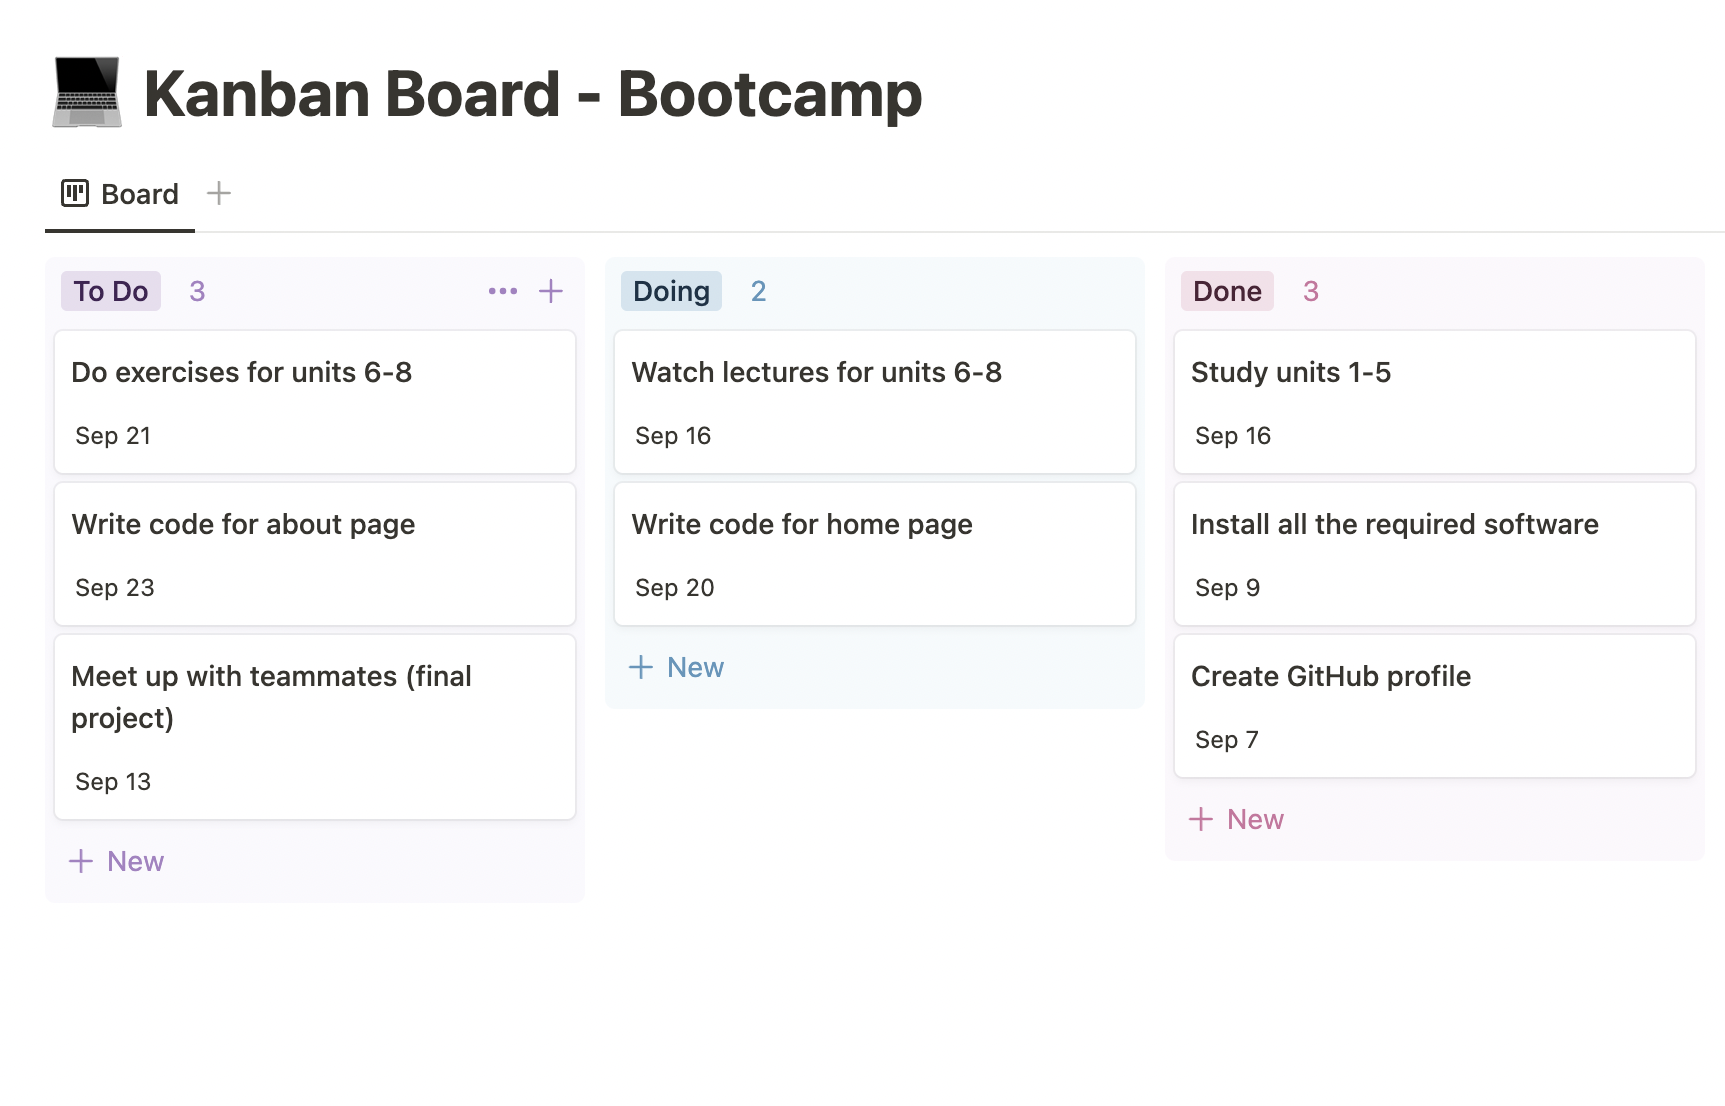 Kanban board which lists typical bootcamp tasks, like studying units or preparing projects, in three columns: to do, doing, and done.